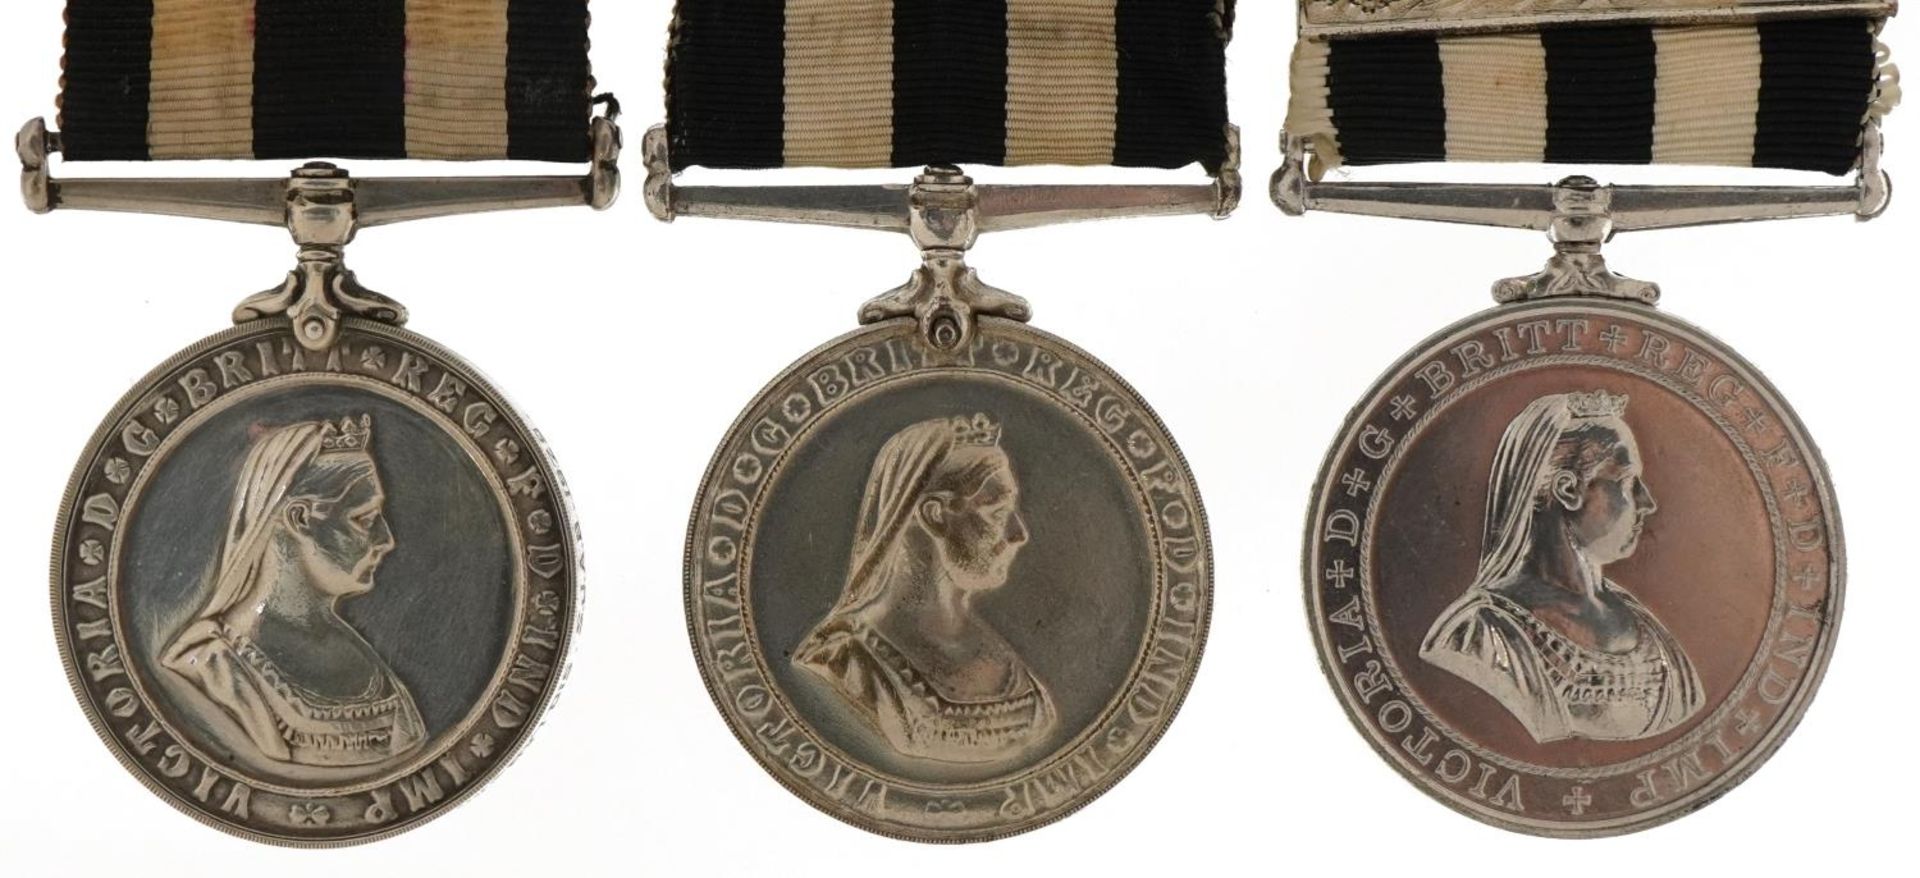 Three St John Ambulance medals including examples awarded to 12530CPL.T.F.RODD.NEWINGTONST.